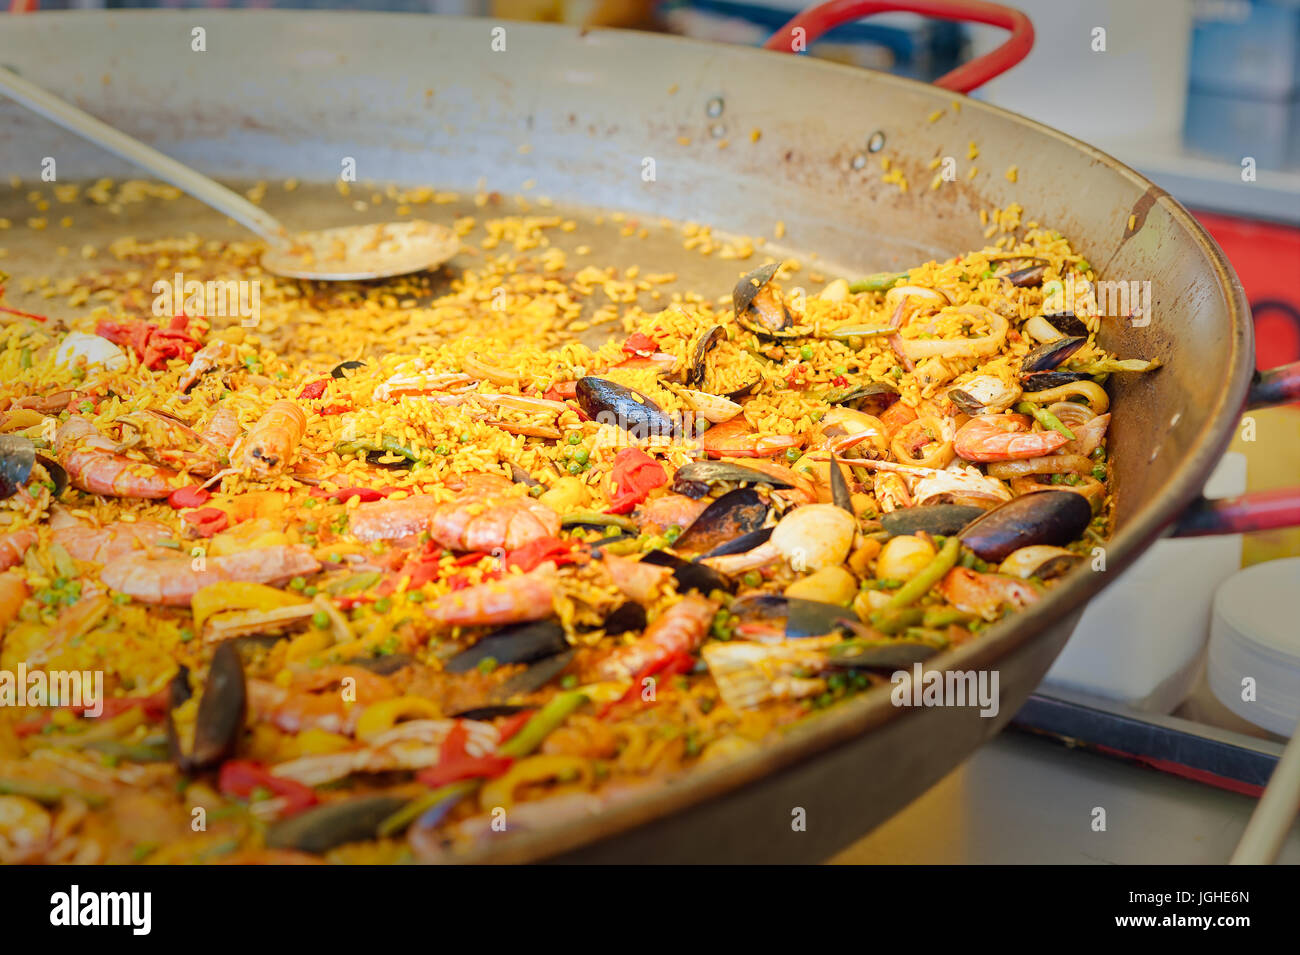 Seafood paella in a paella pan at a street food market  Traditional Spanish paella with seafood and chicken. Stock Photo